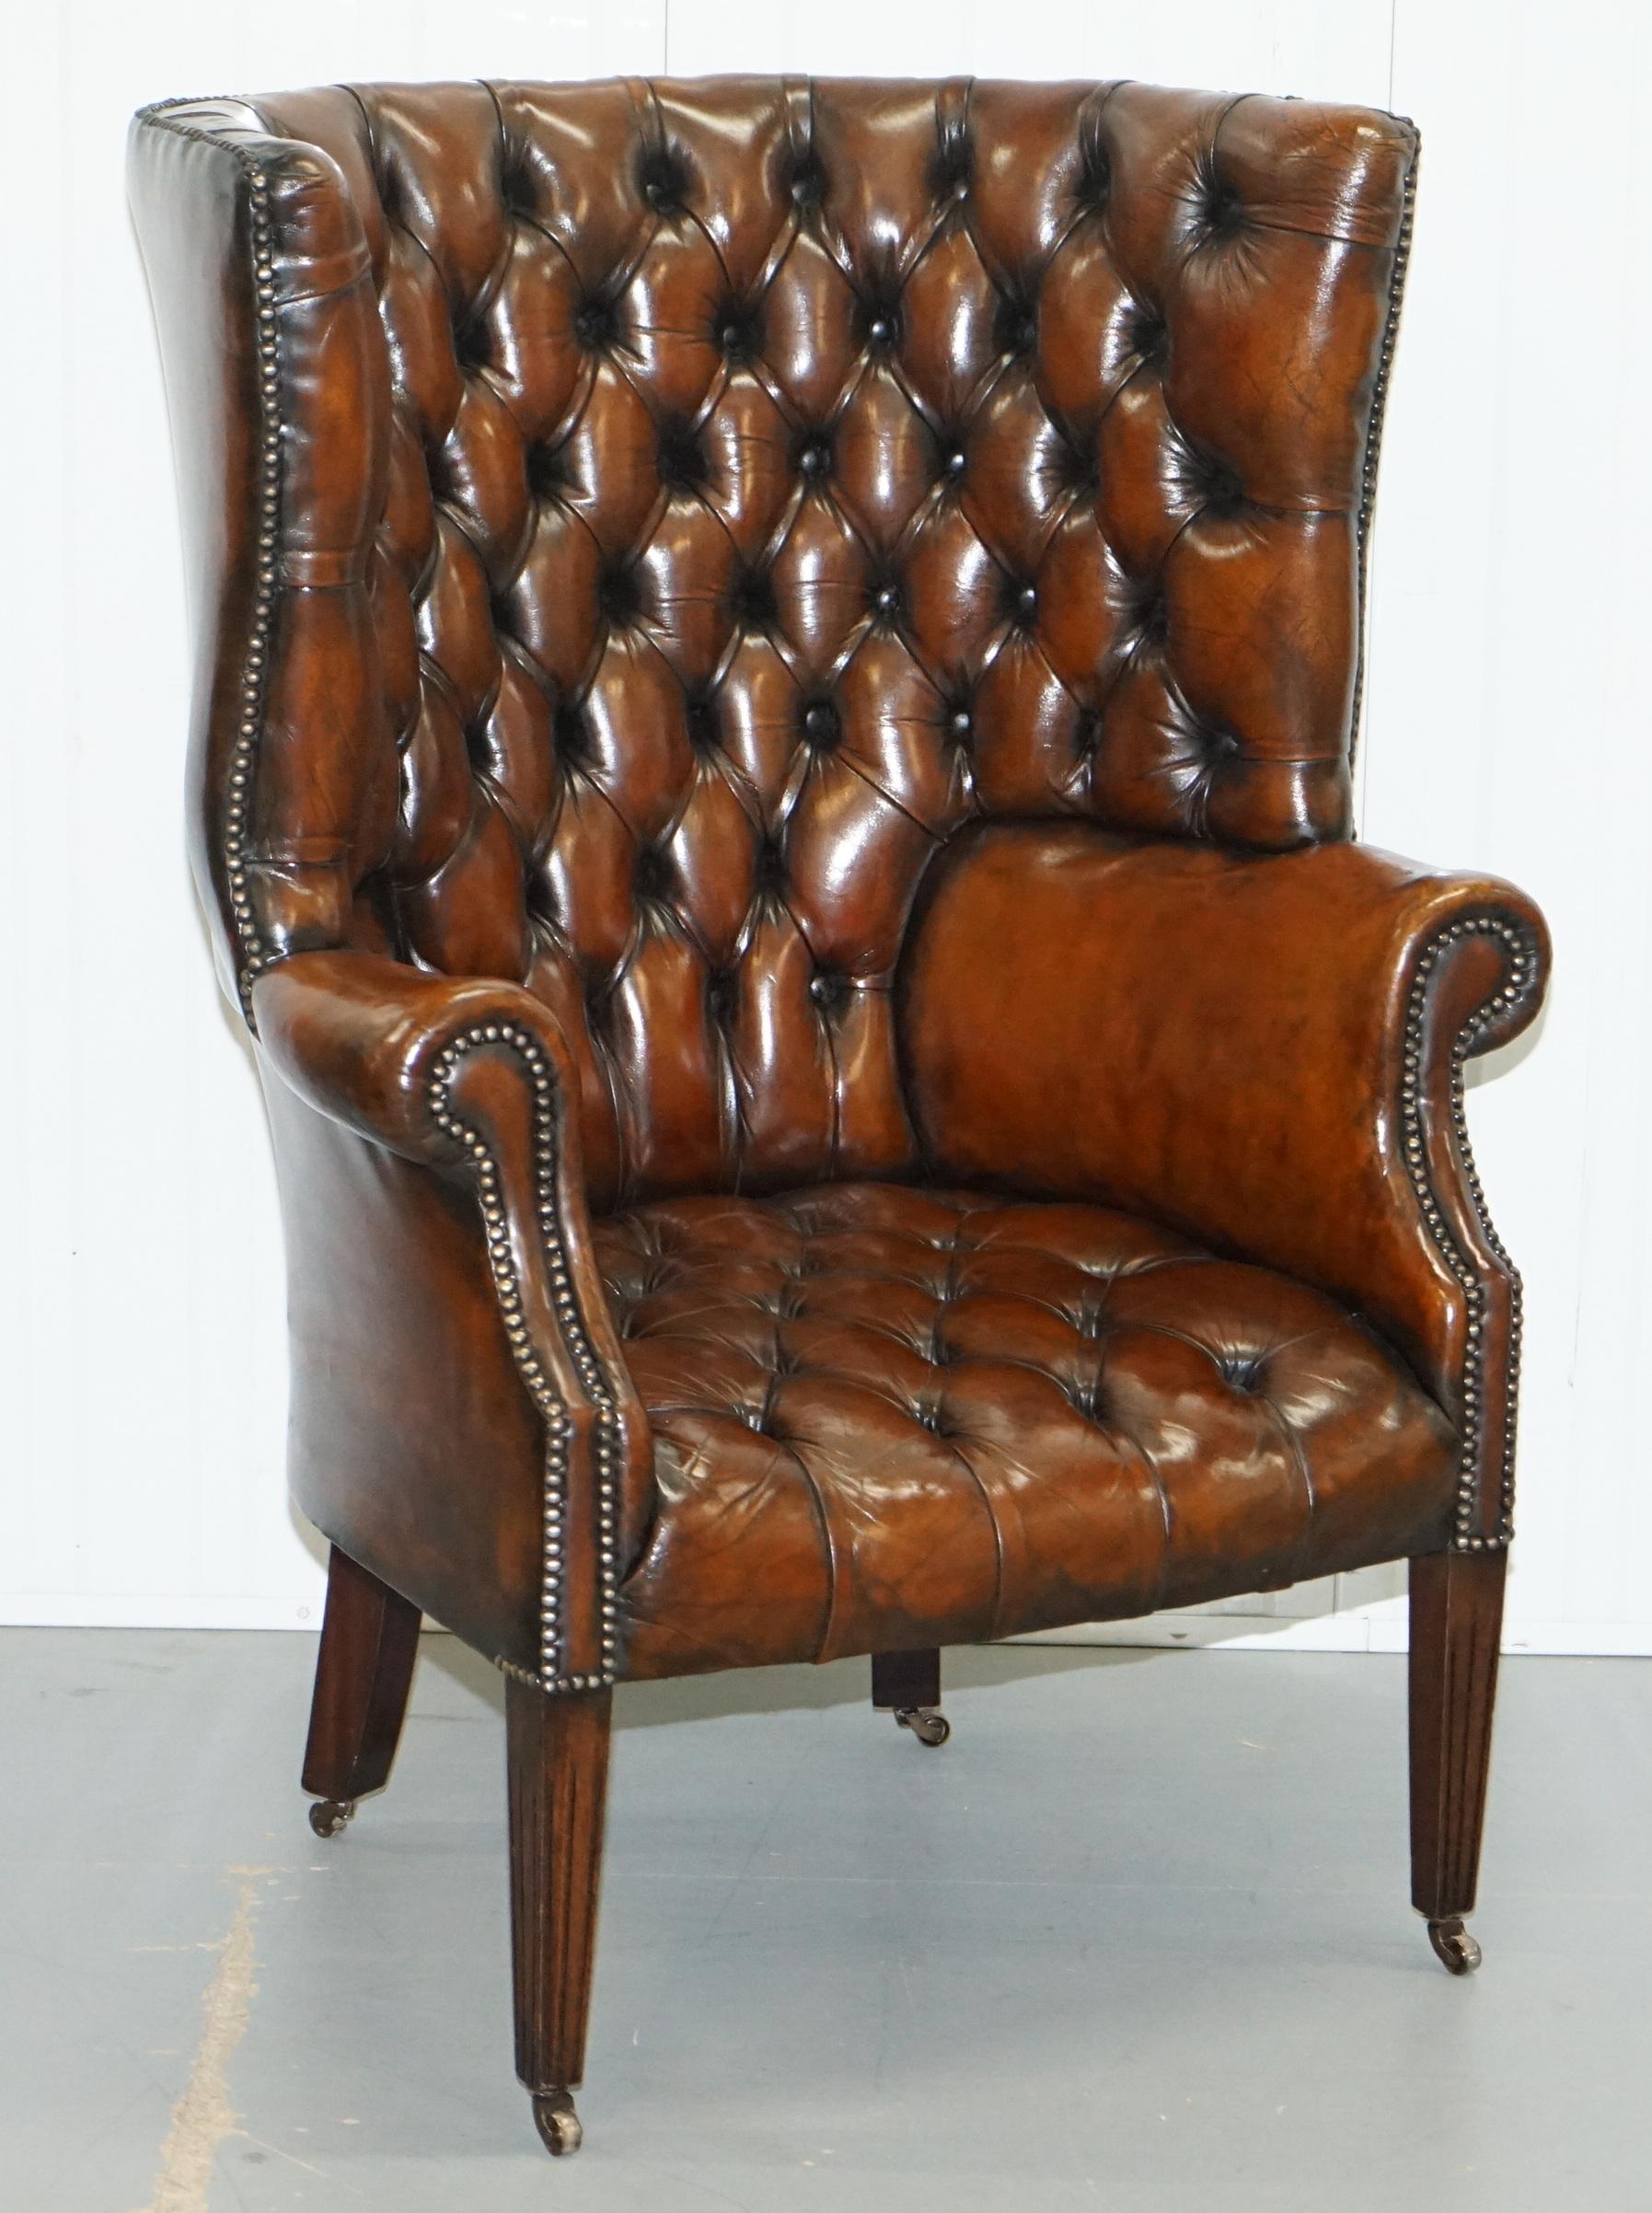 We are delighted to offer for sale this stunning pair of very rare fully restored late 1930s Porters Barrel back armchairs with vintage castors 

These chairs are a real tour de force, they have absolutely everything going for them, the leather